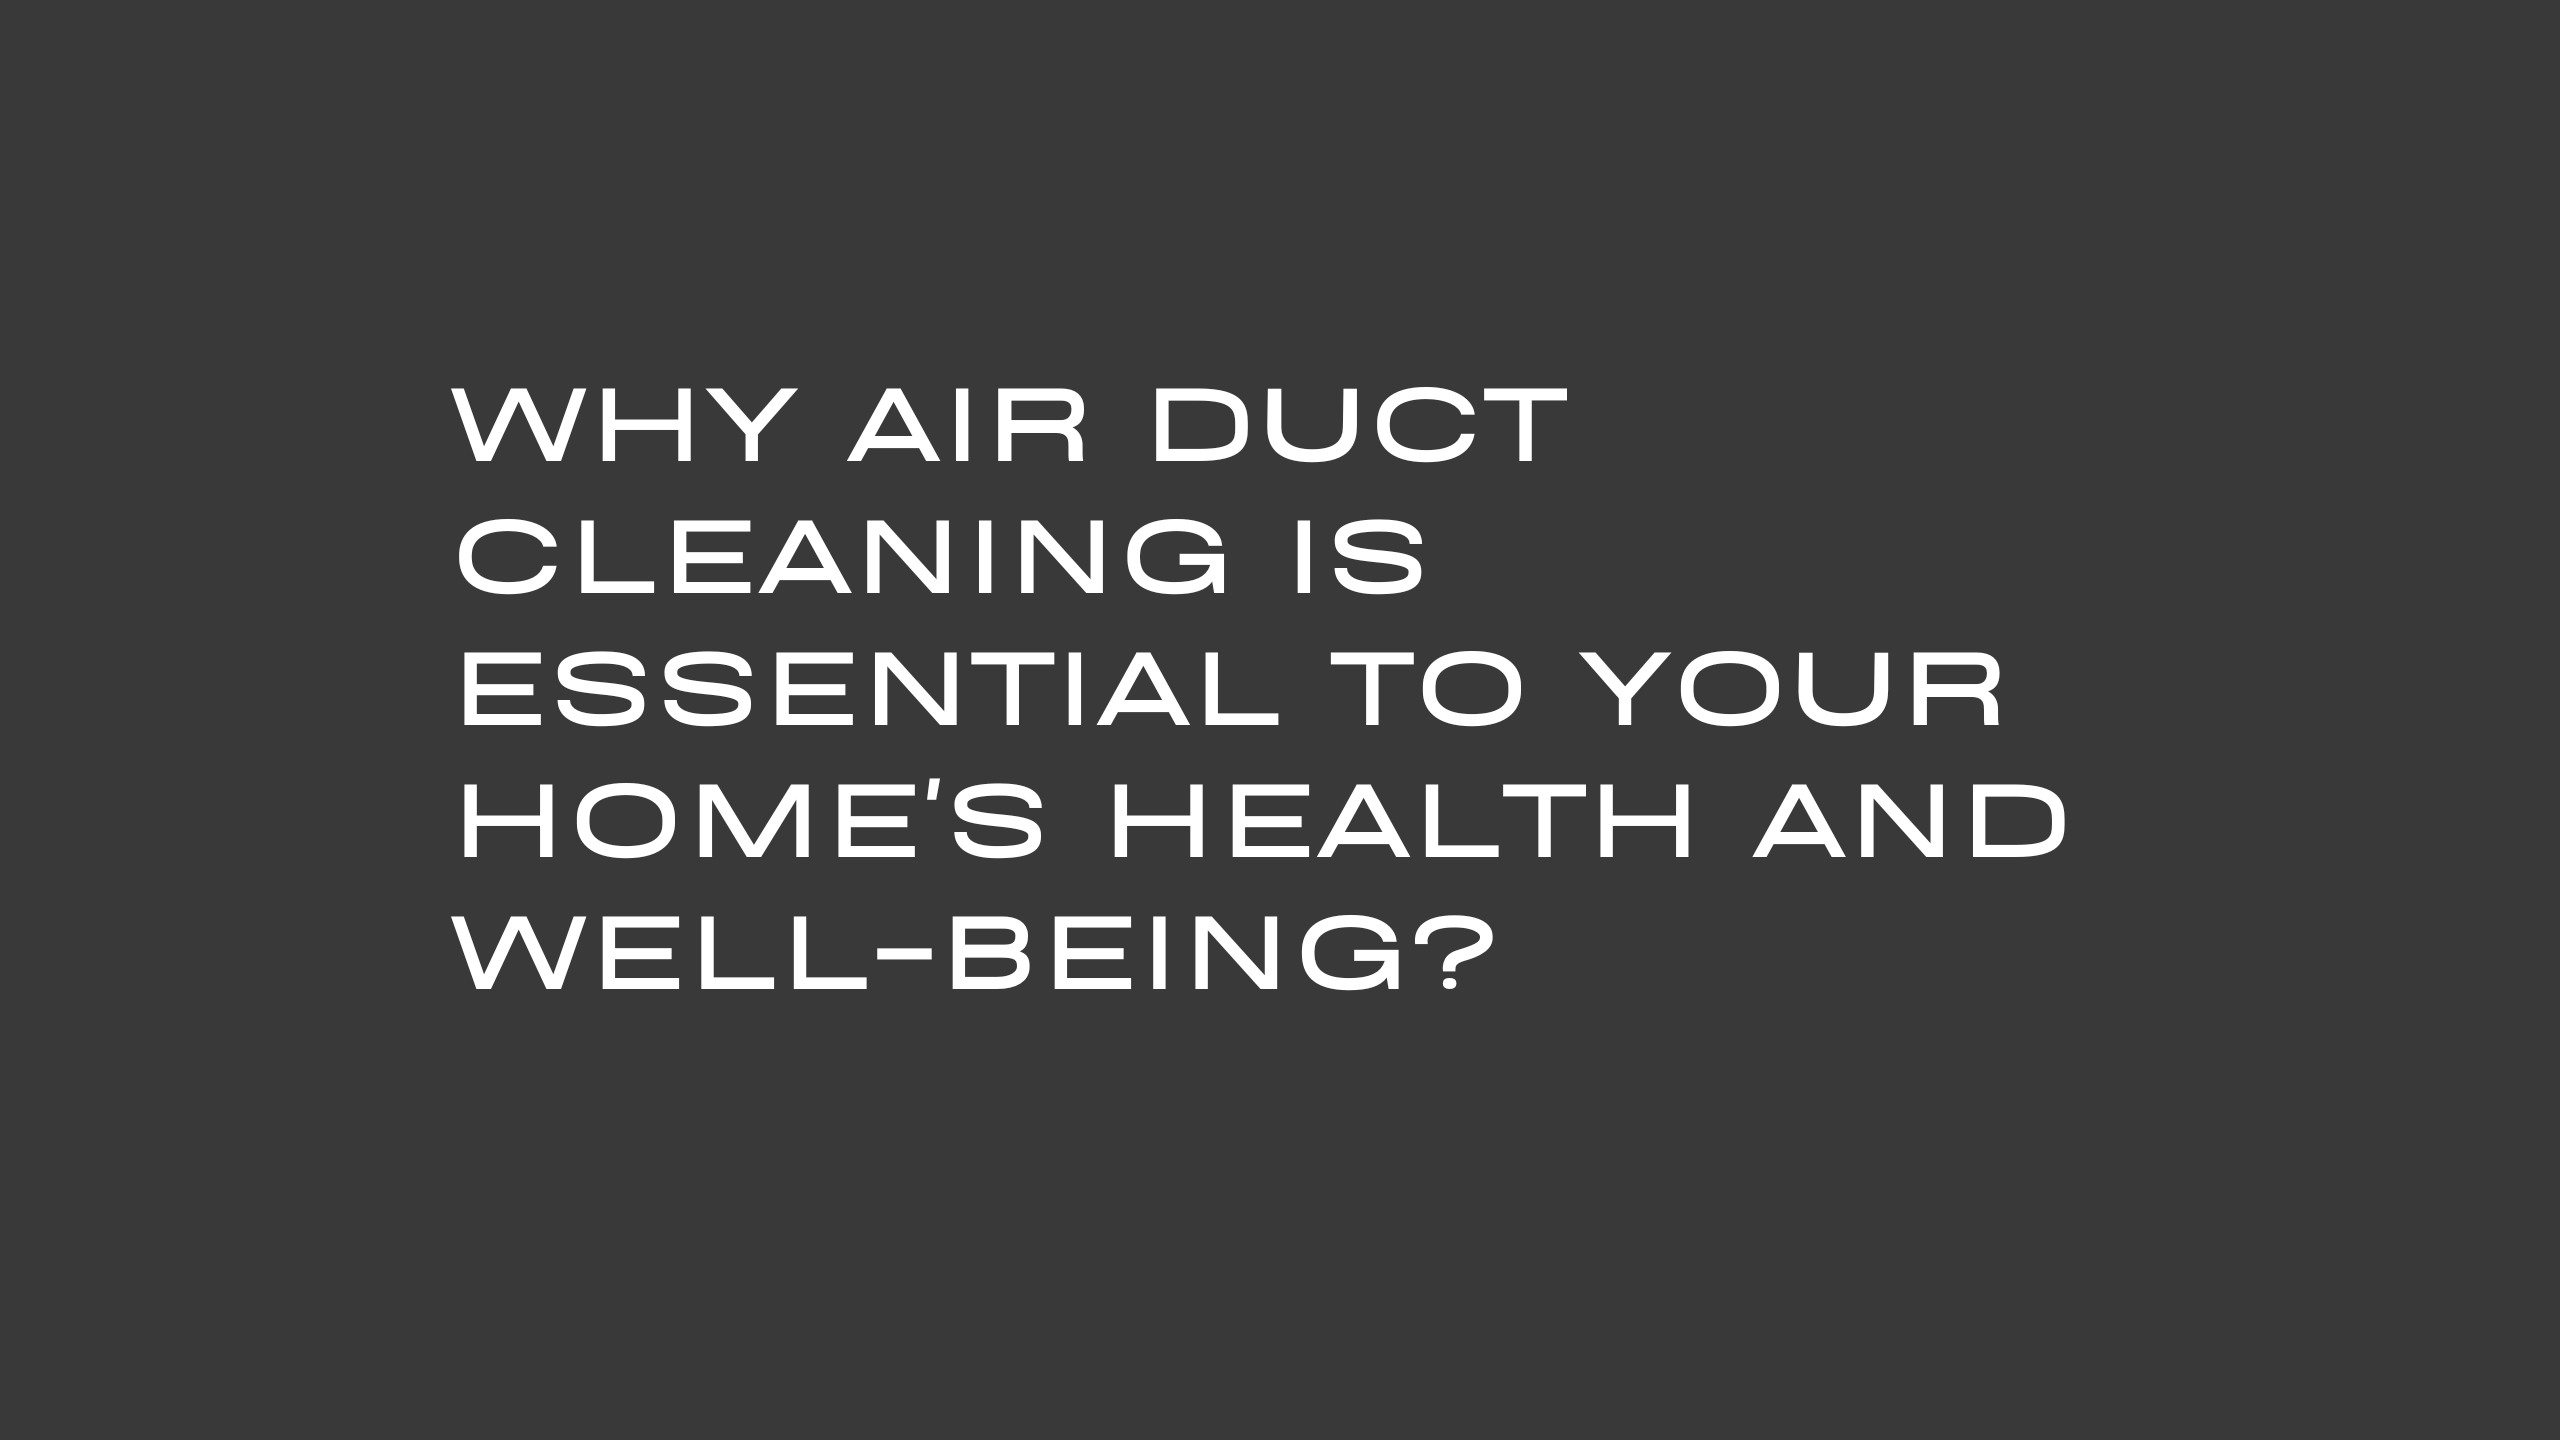 Why Air Duct Cleaning is Essential to Your Home's Health and Well-Being